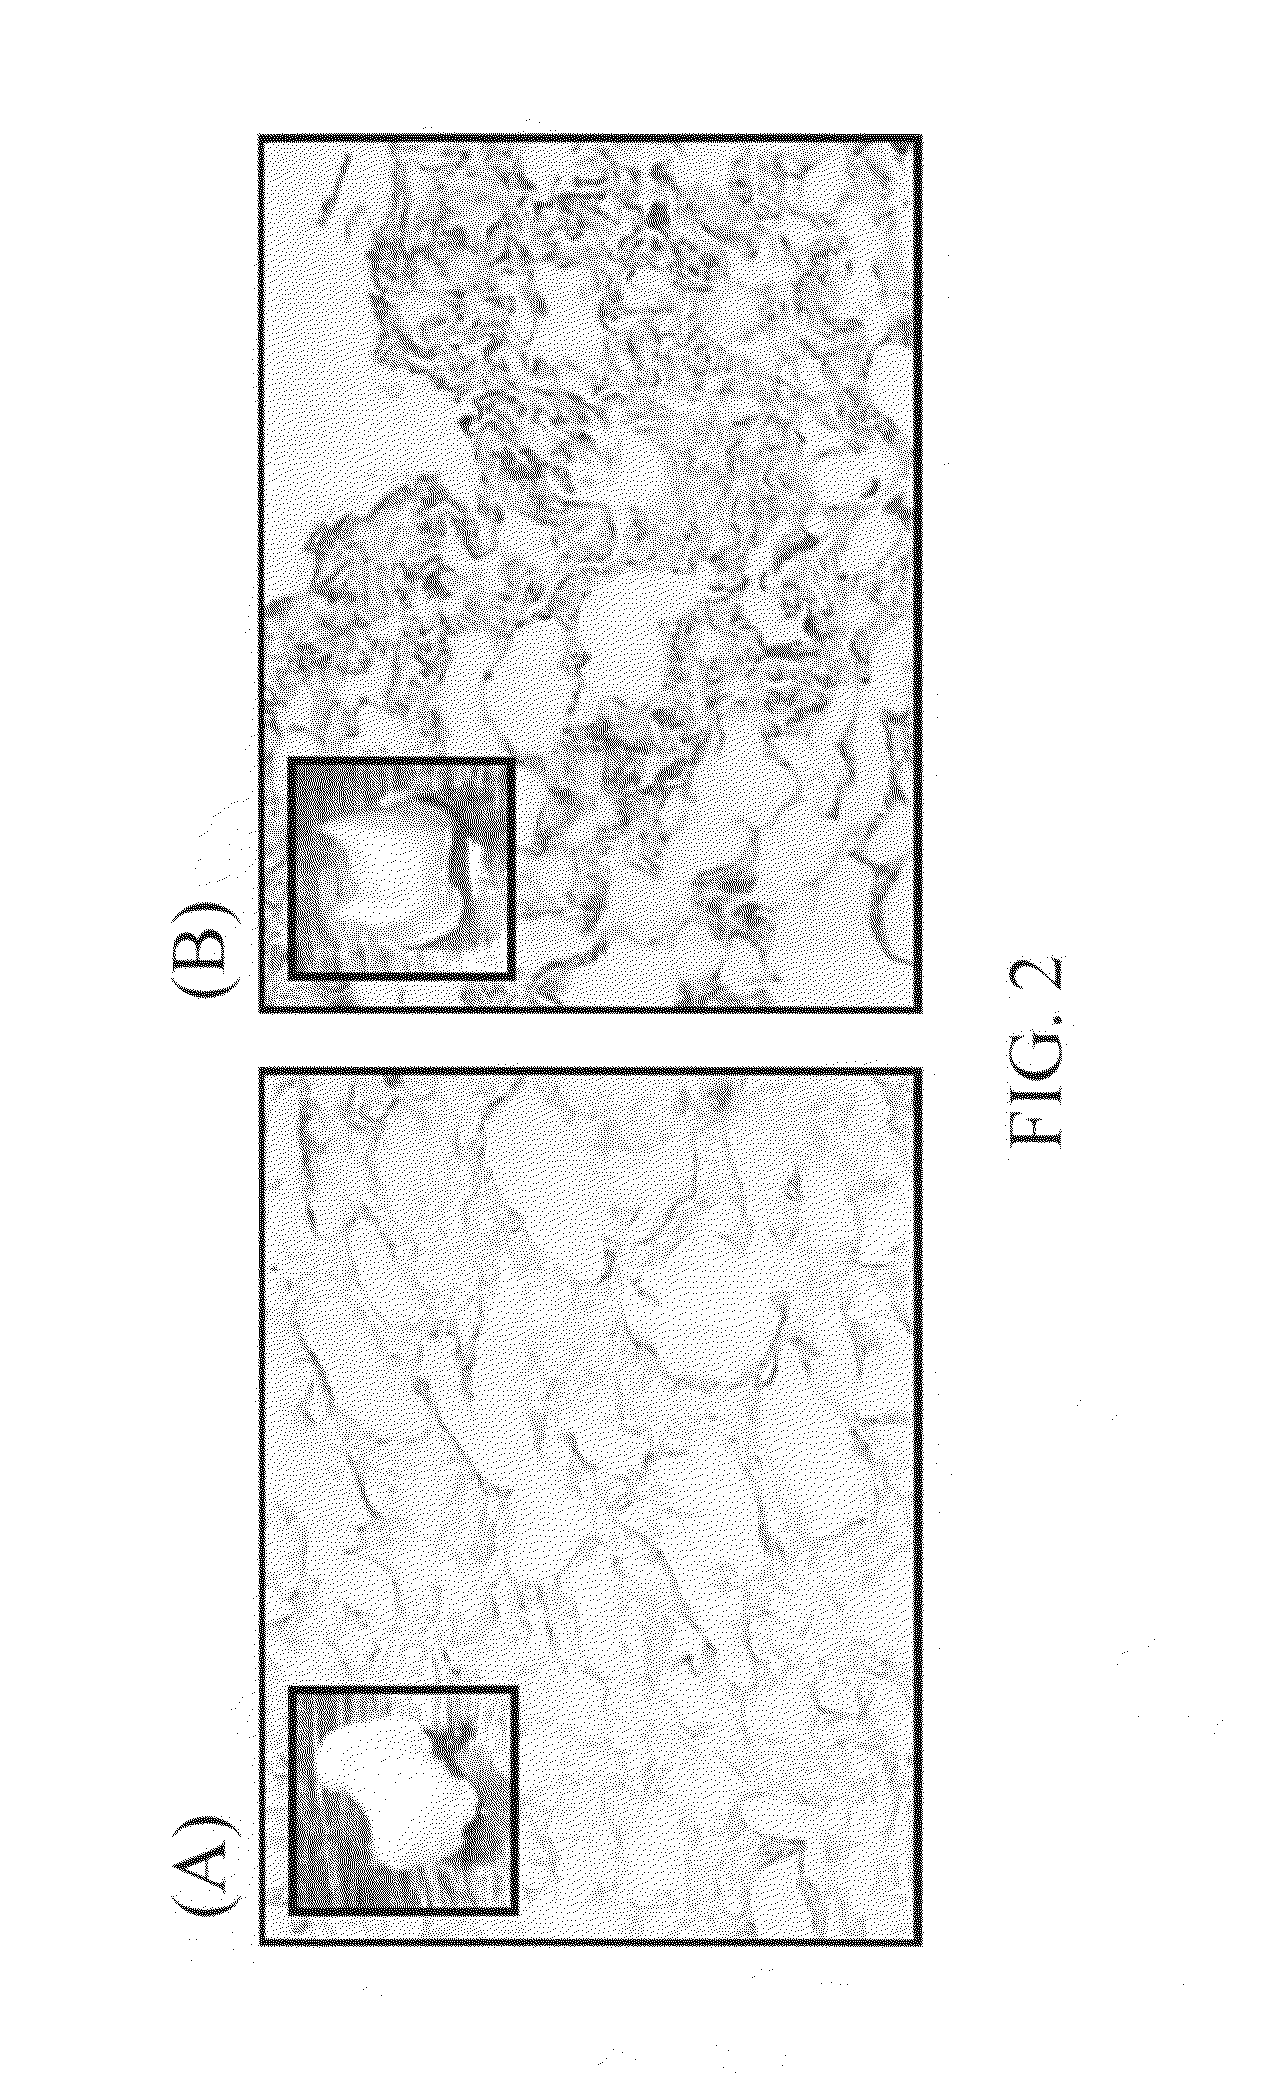 Bone implant and manufacturing method thereof